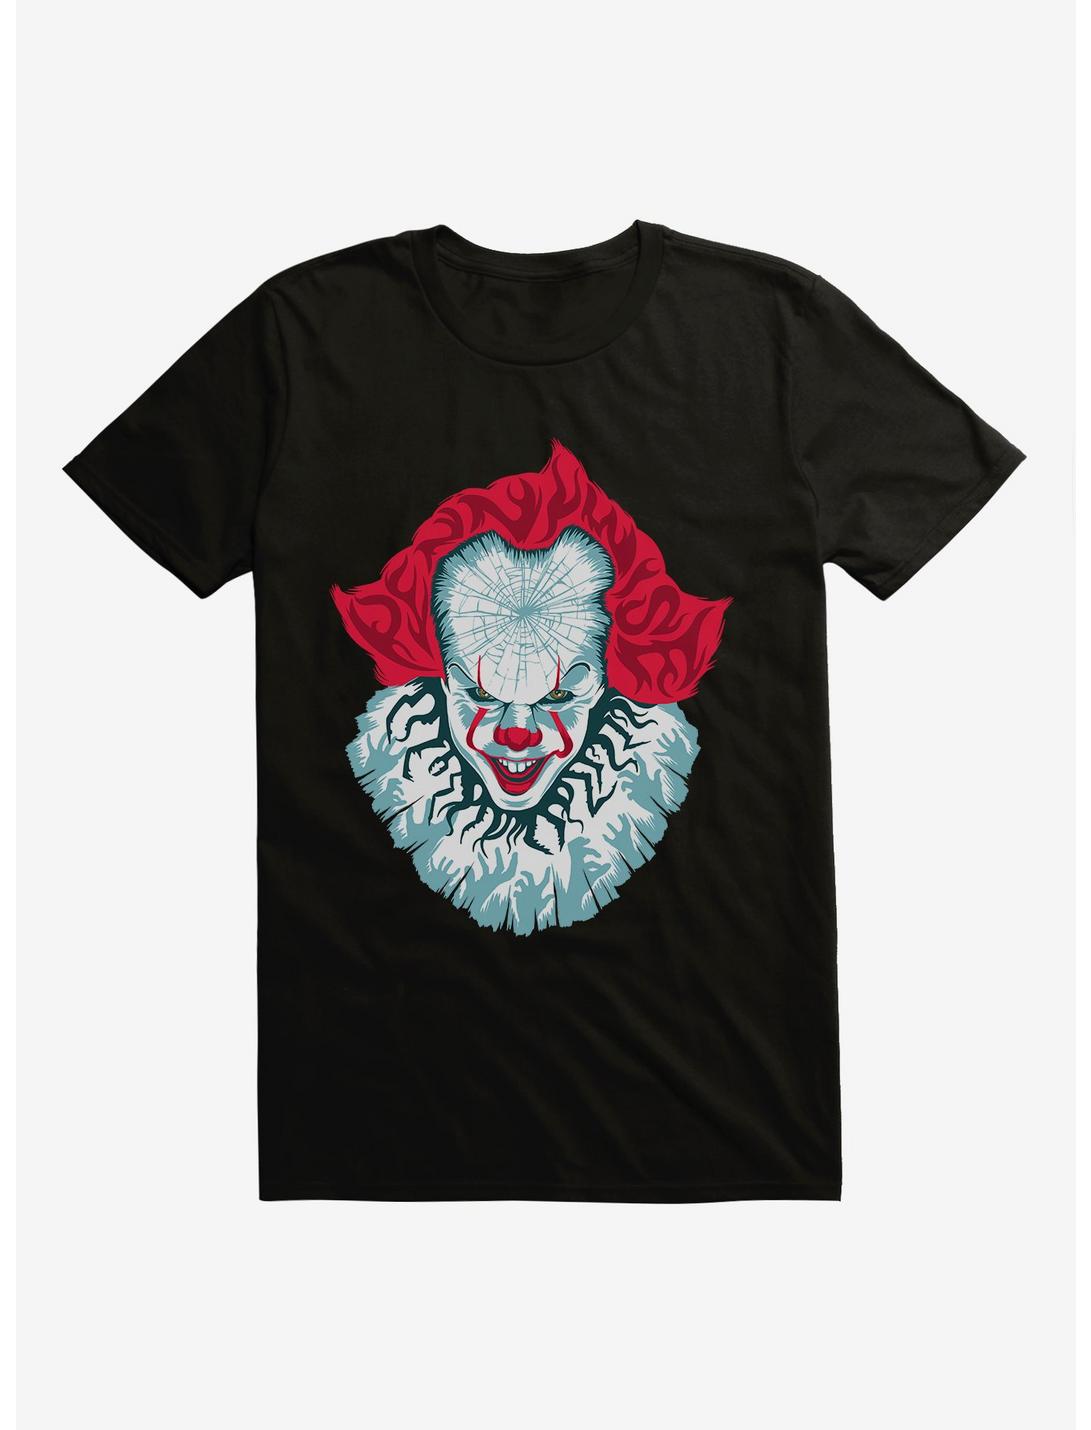 IT Chapter Two Vibrant Pennywise Script Art T-Shirt, BLACK, hi-res